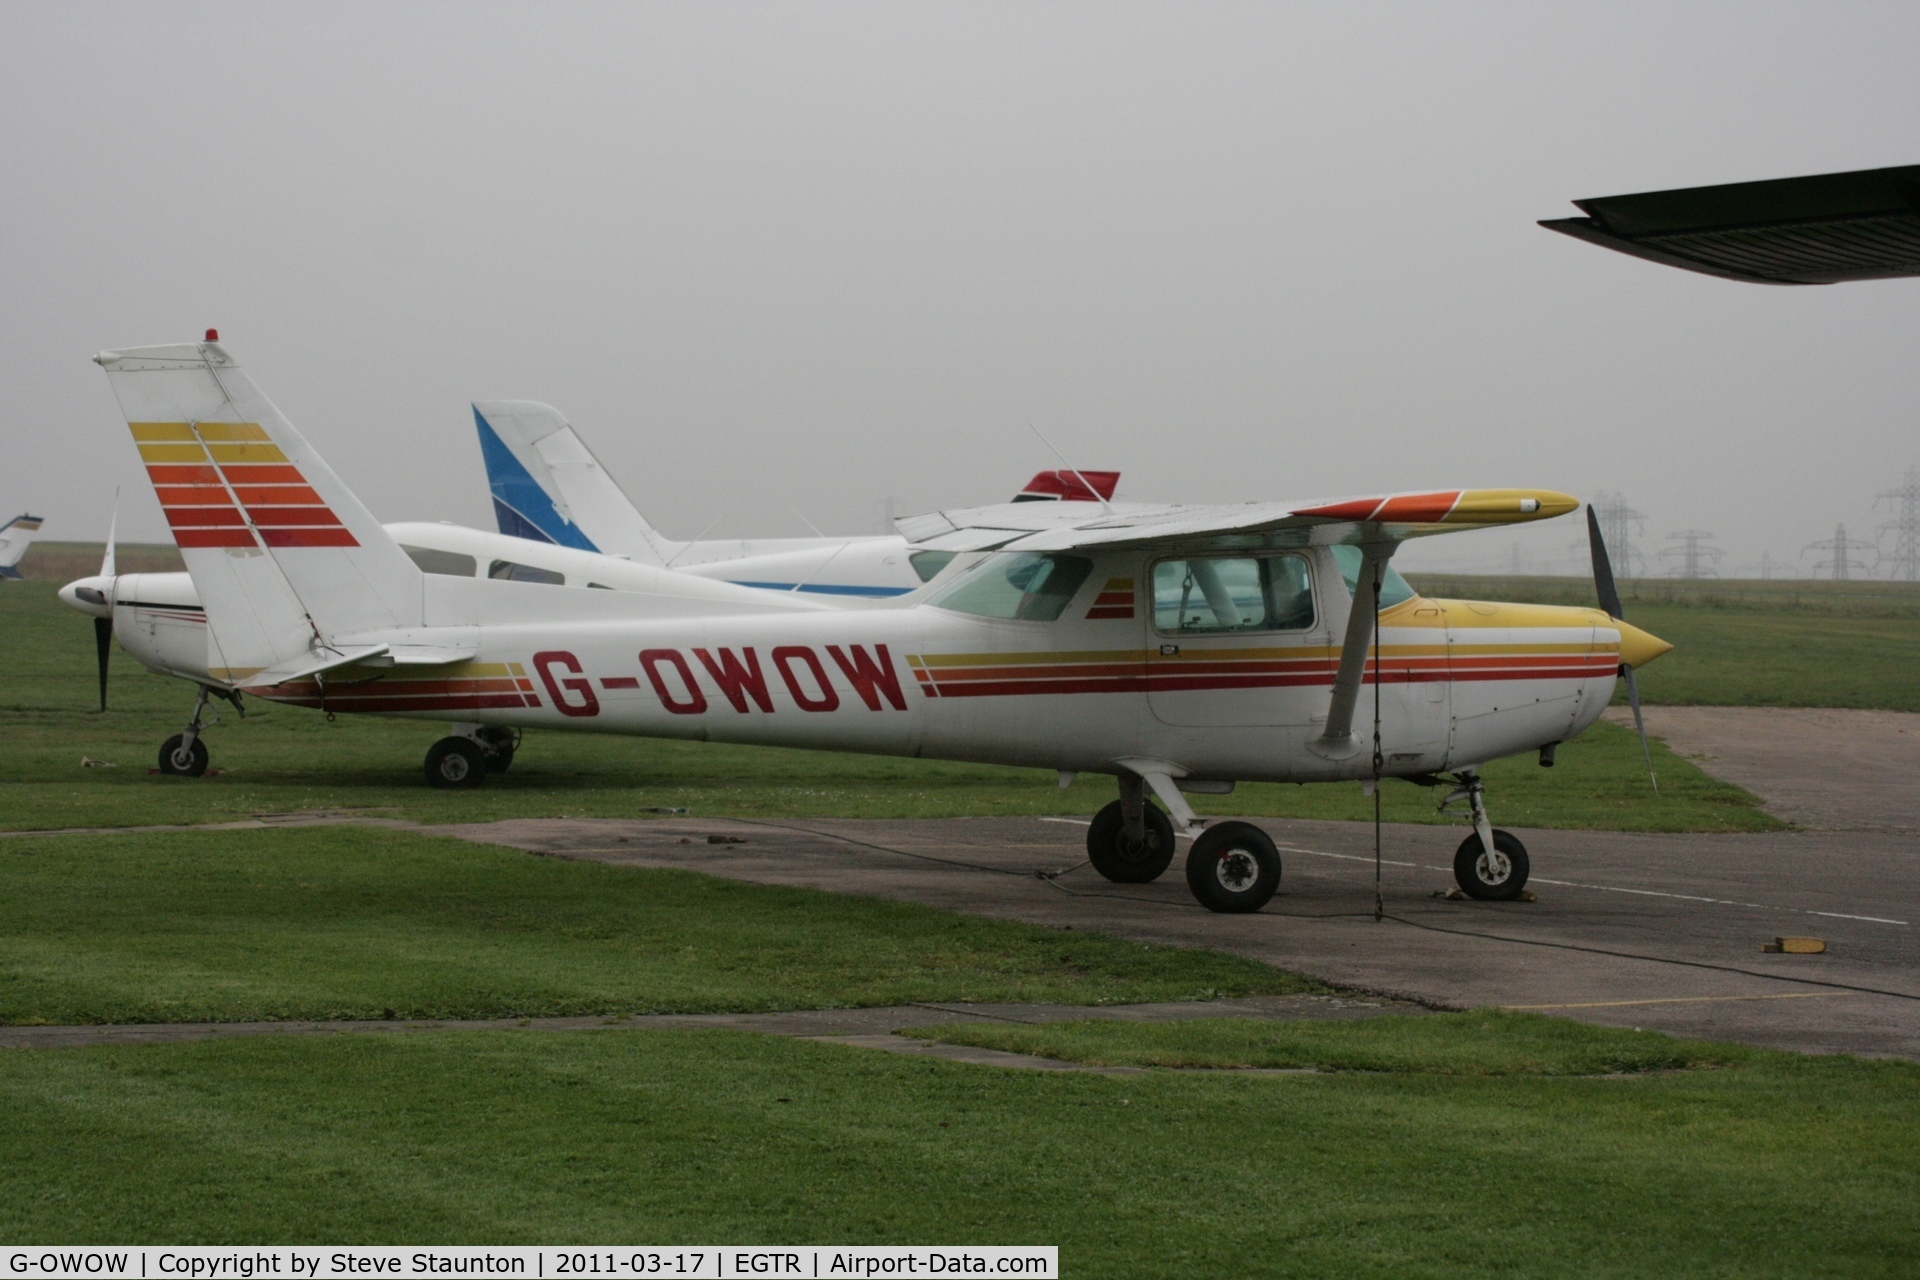 G-OWOW, 1979 Cessna 152 C/N 152-83199, Taken at Elstree Airfield March 2011